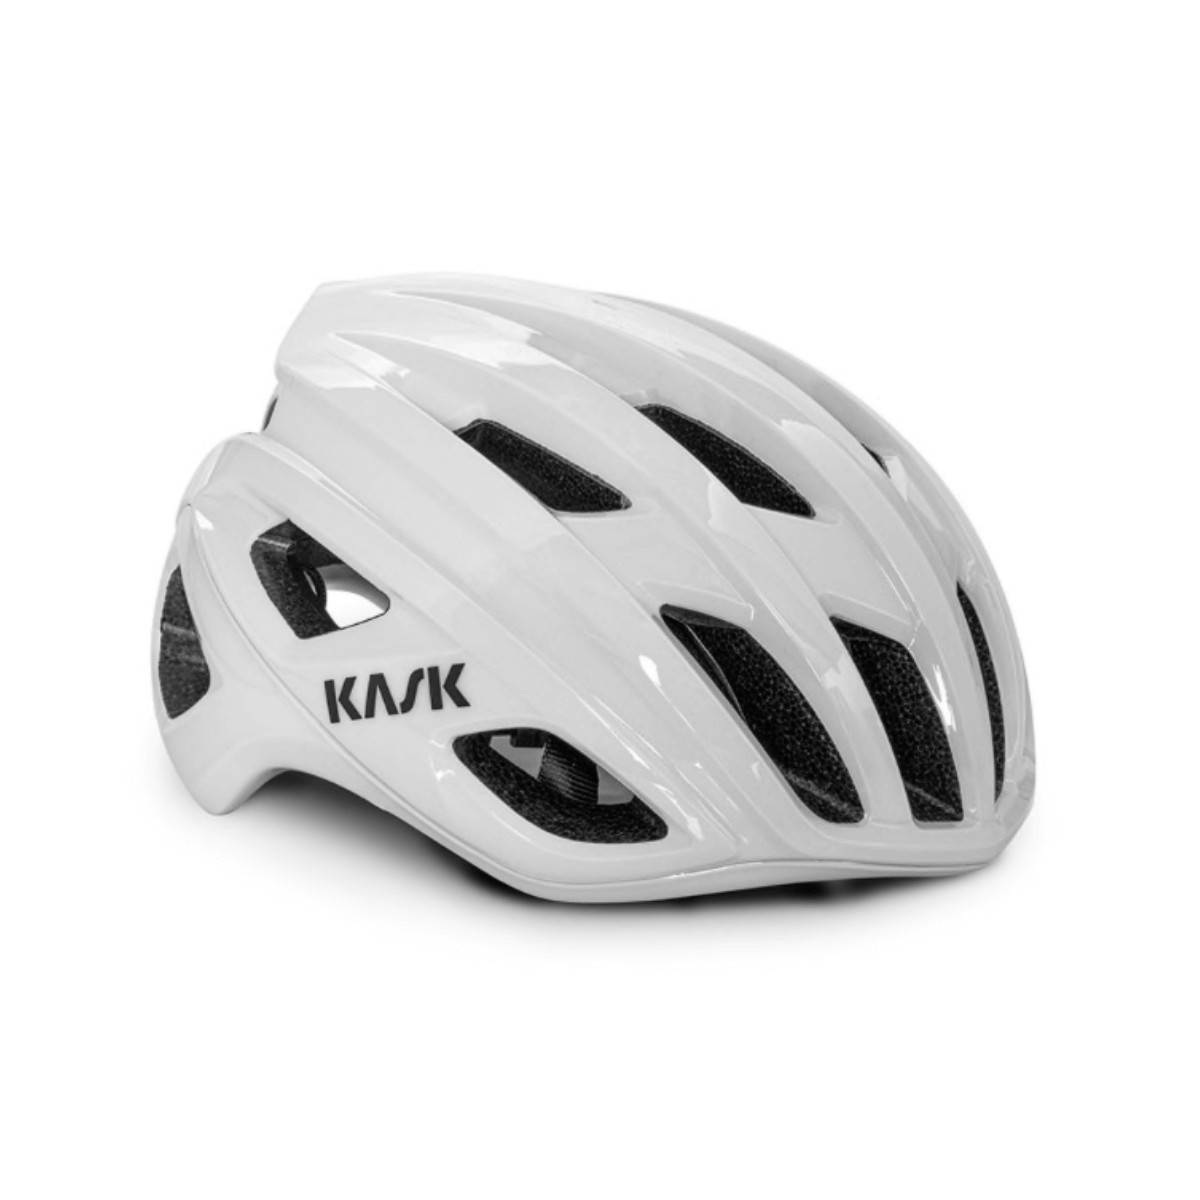 Kask Mojito 3 White Helmet, Size L product